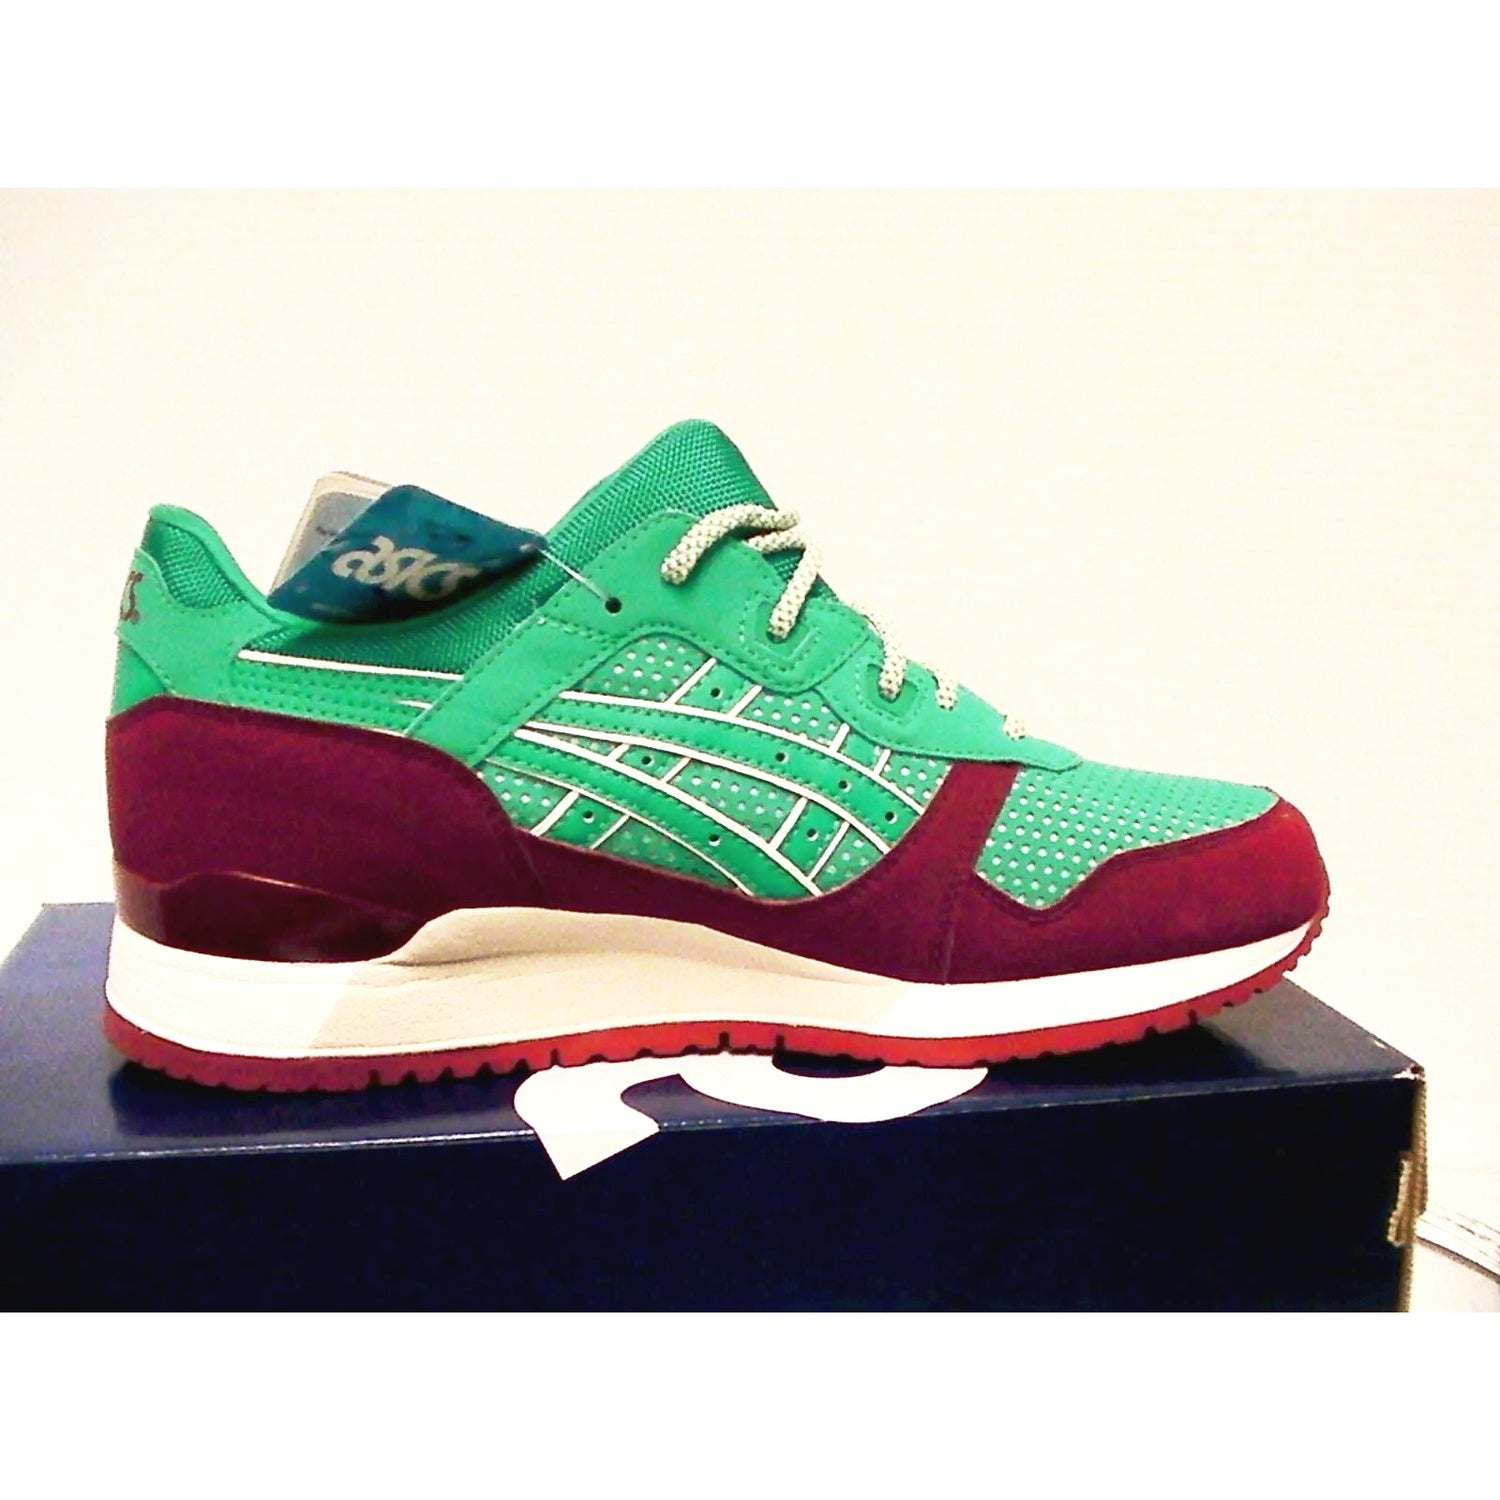 Asics running shoes gel-lyte iii size 8 us men spectra green new with box - Classic Fashion Deals